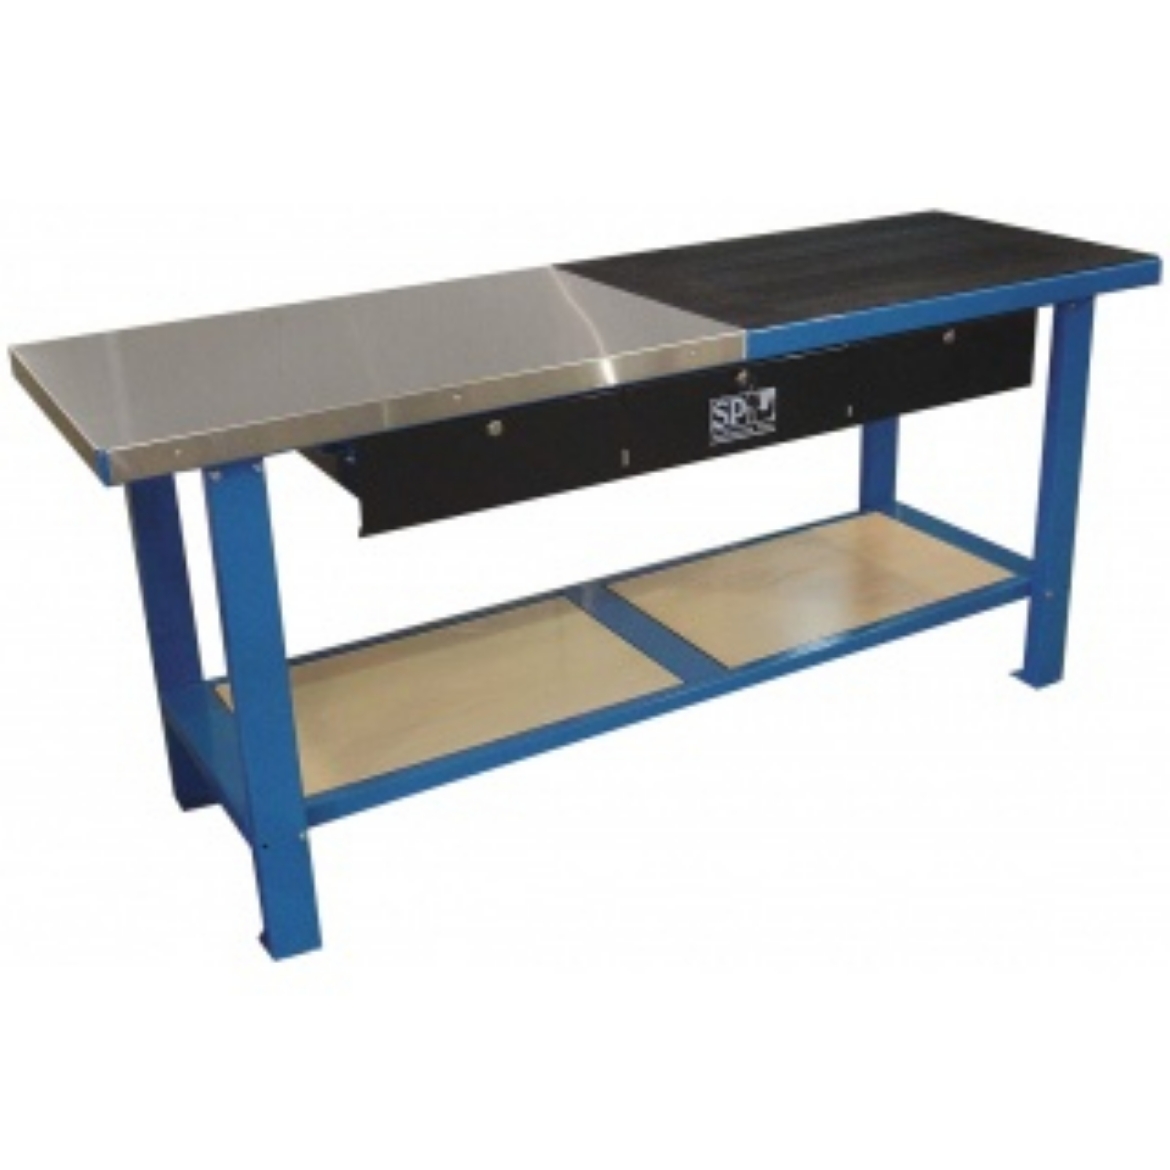 Picture of WORK BENCH CUSTOM 2000MM 3 DRAWER S/S,RUBBER TOP, 1T CAP., 53L STORAGE CAP.